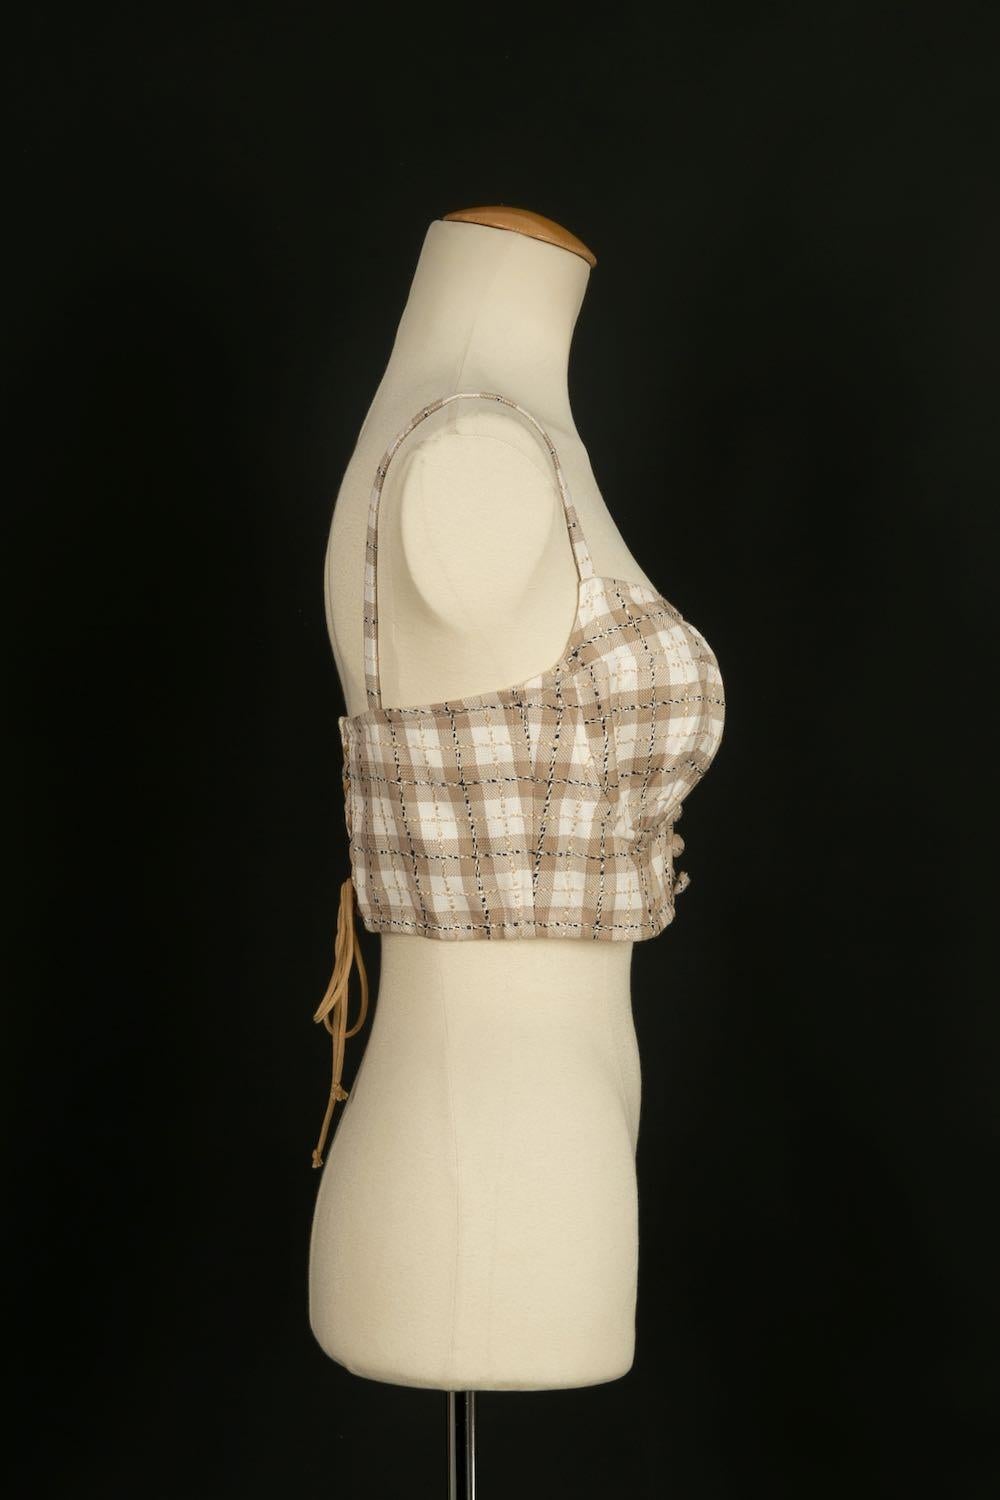 Jean-Louis Scherrer - (Made in France) Wool blend top with check and silk lining. Size 40FR.

Additional information:
Condition: Very good condition
Dimensions: Chest : 36 cm - Height : 21 cm

Seller Reference: FH128